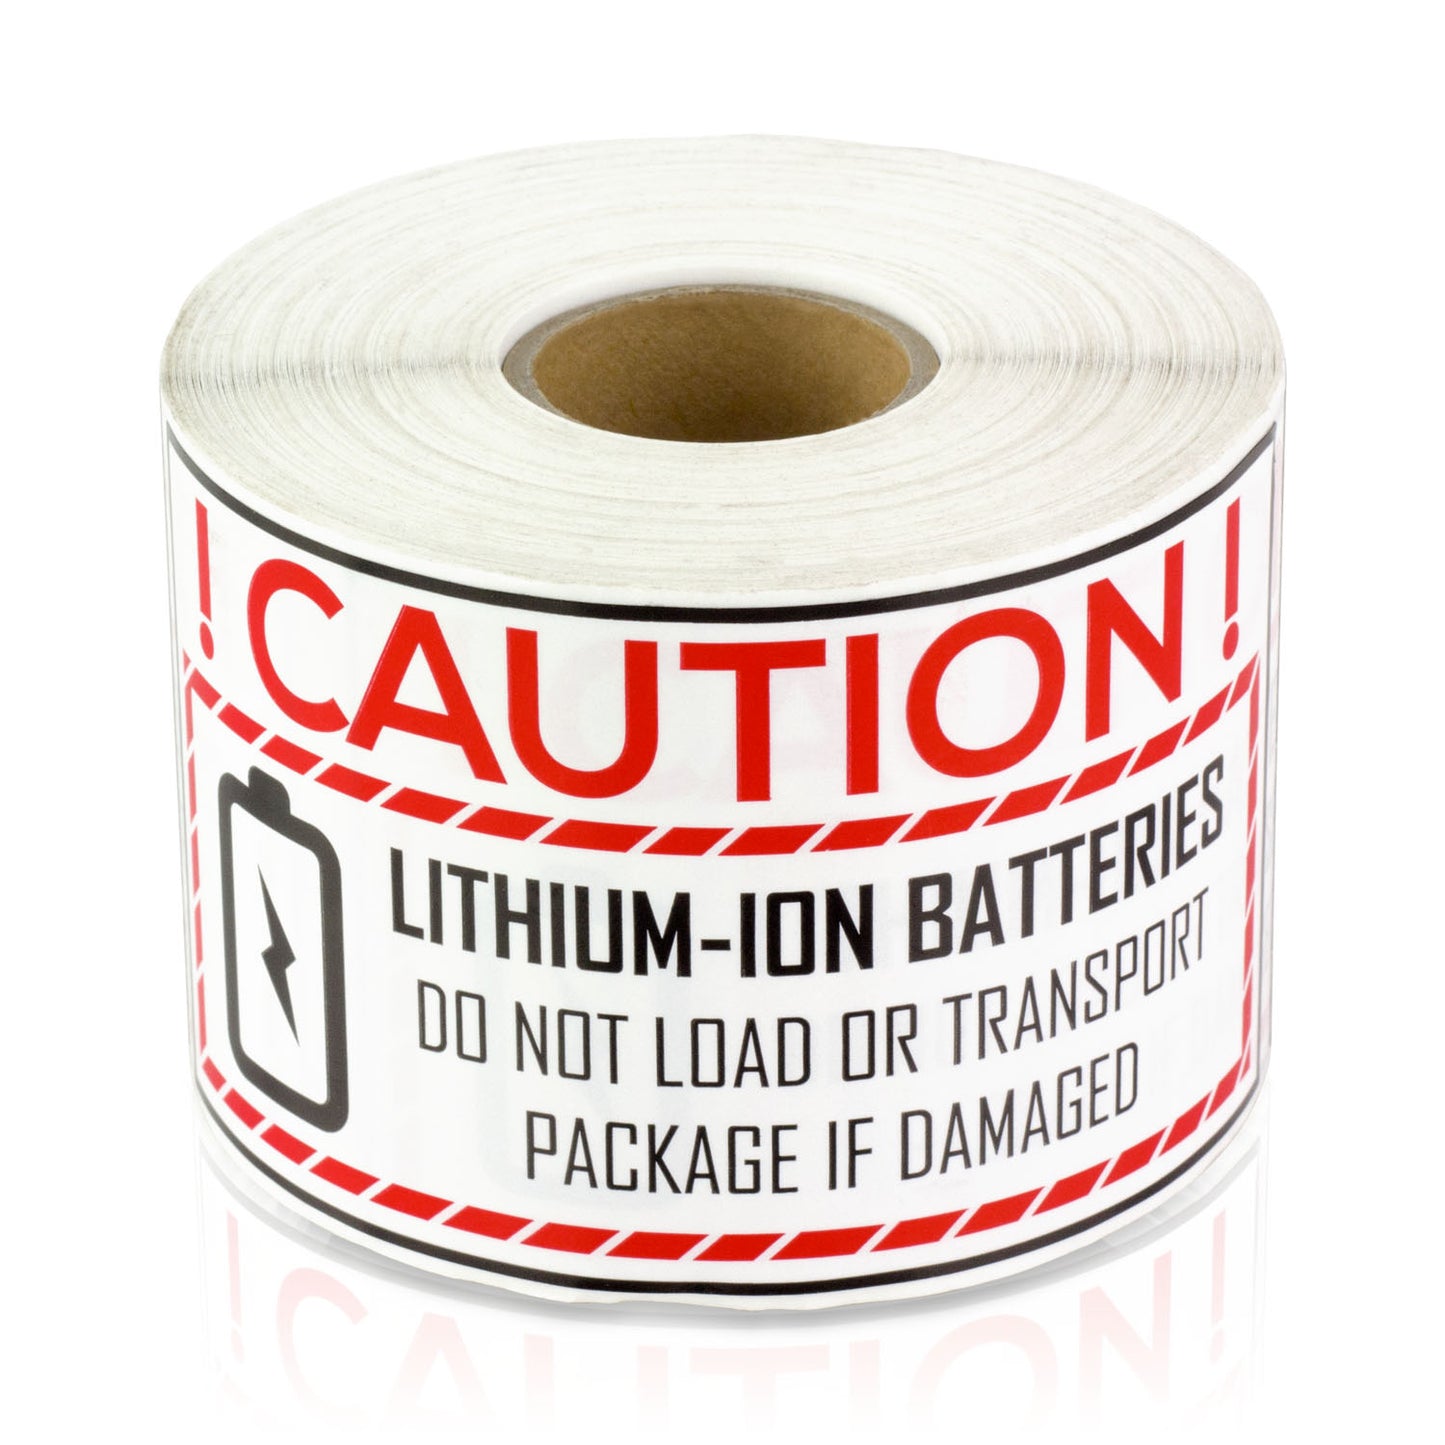 4 x 2 inch | Shipping & Handling: Caution Lithium Ion Battery Stickers